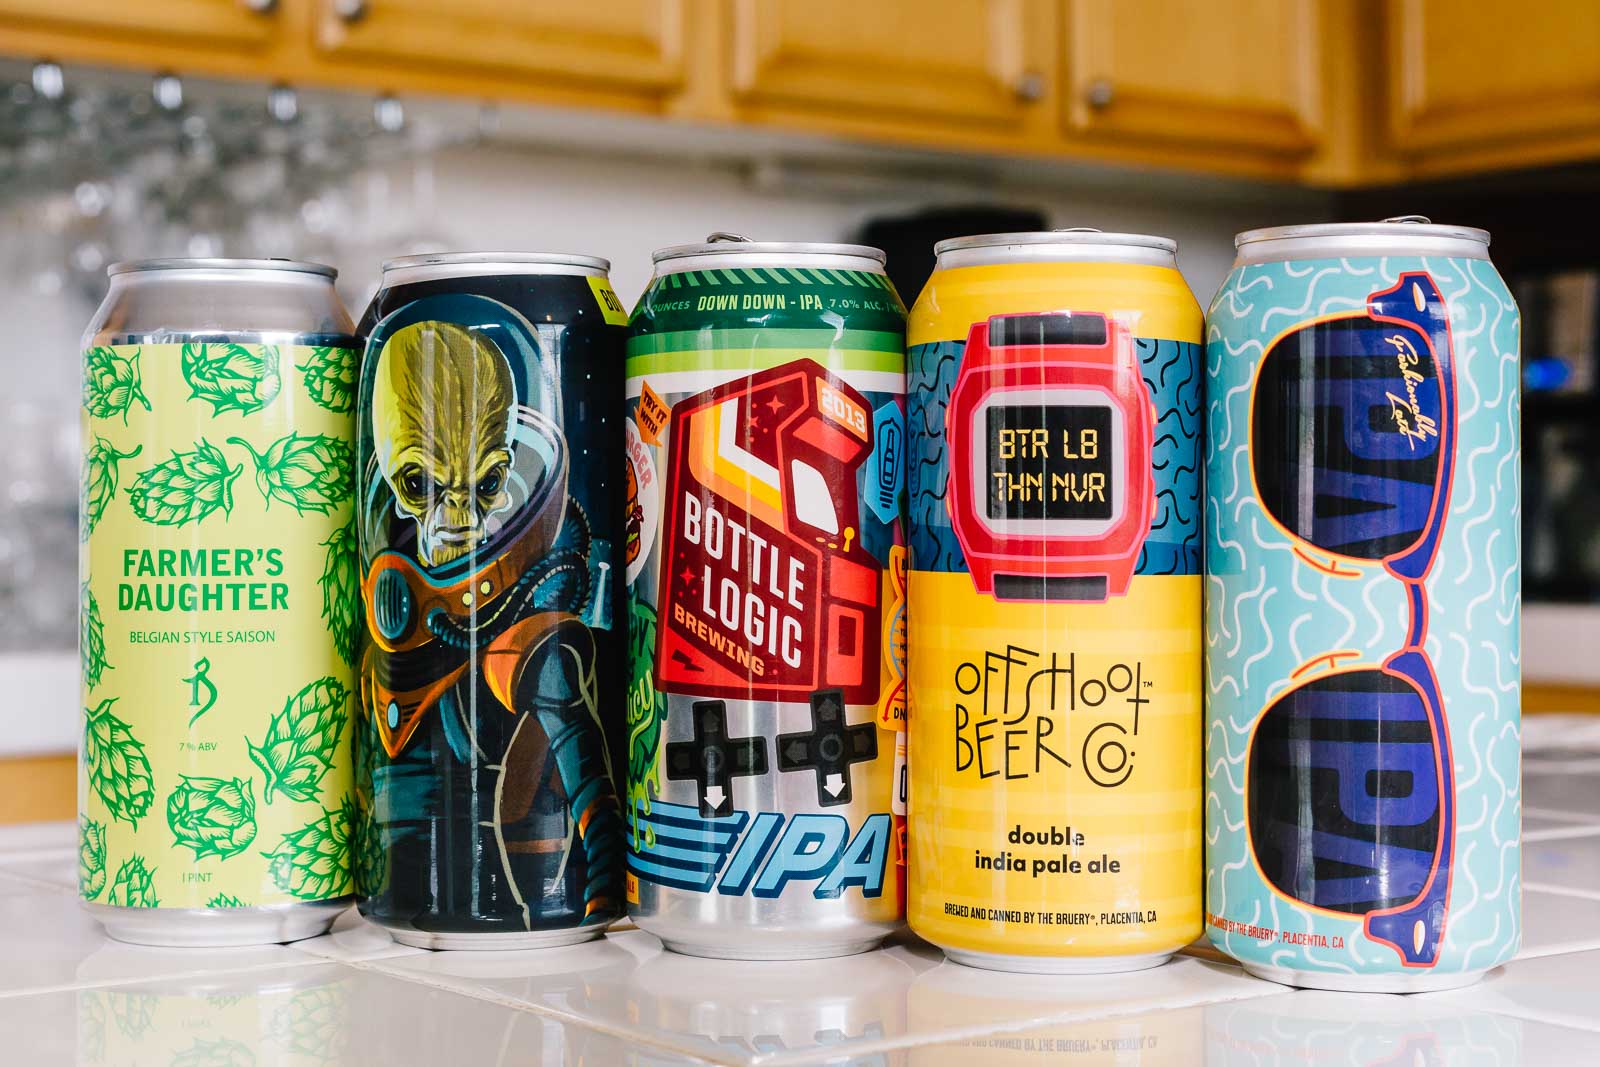 Beers from Offshoot Beer Co, The Alchemist, and Bottle Logic Brewing